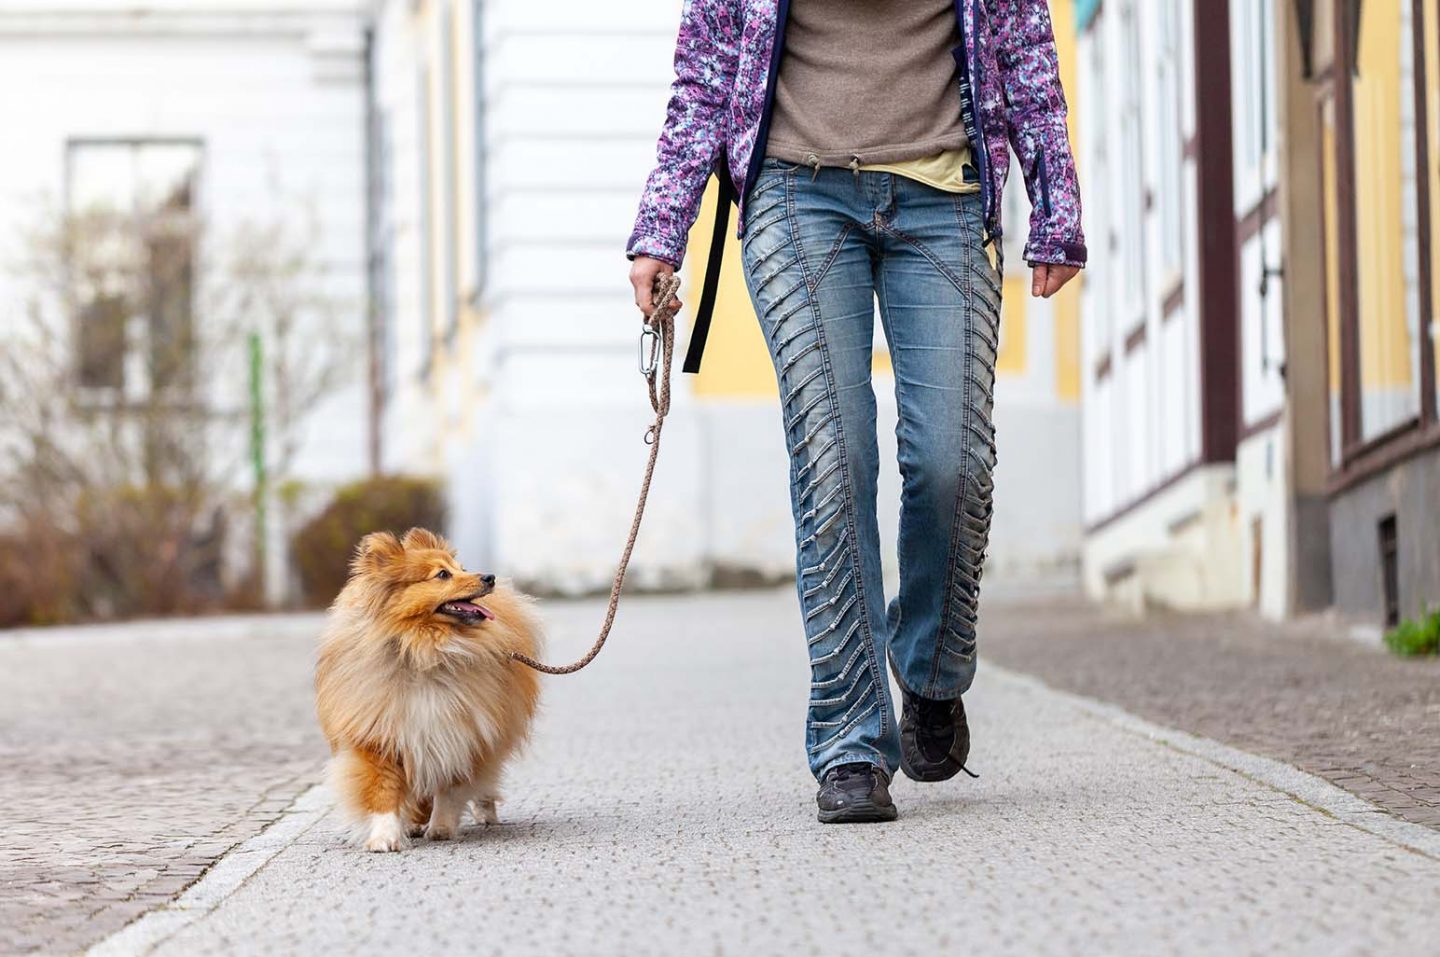 Things to Look For in a Pet Sitter